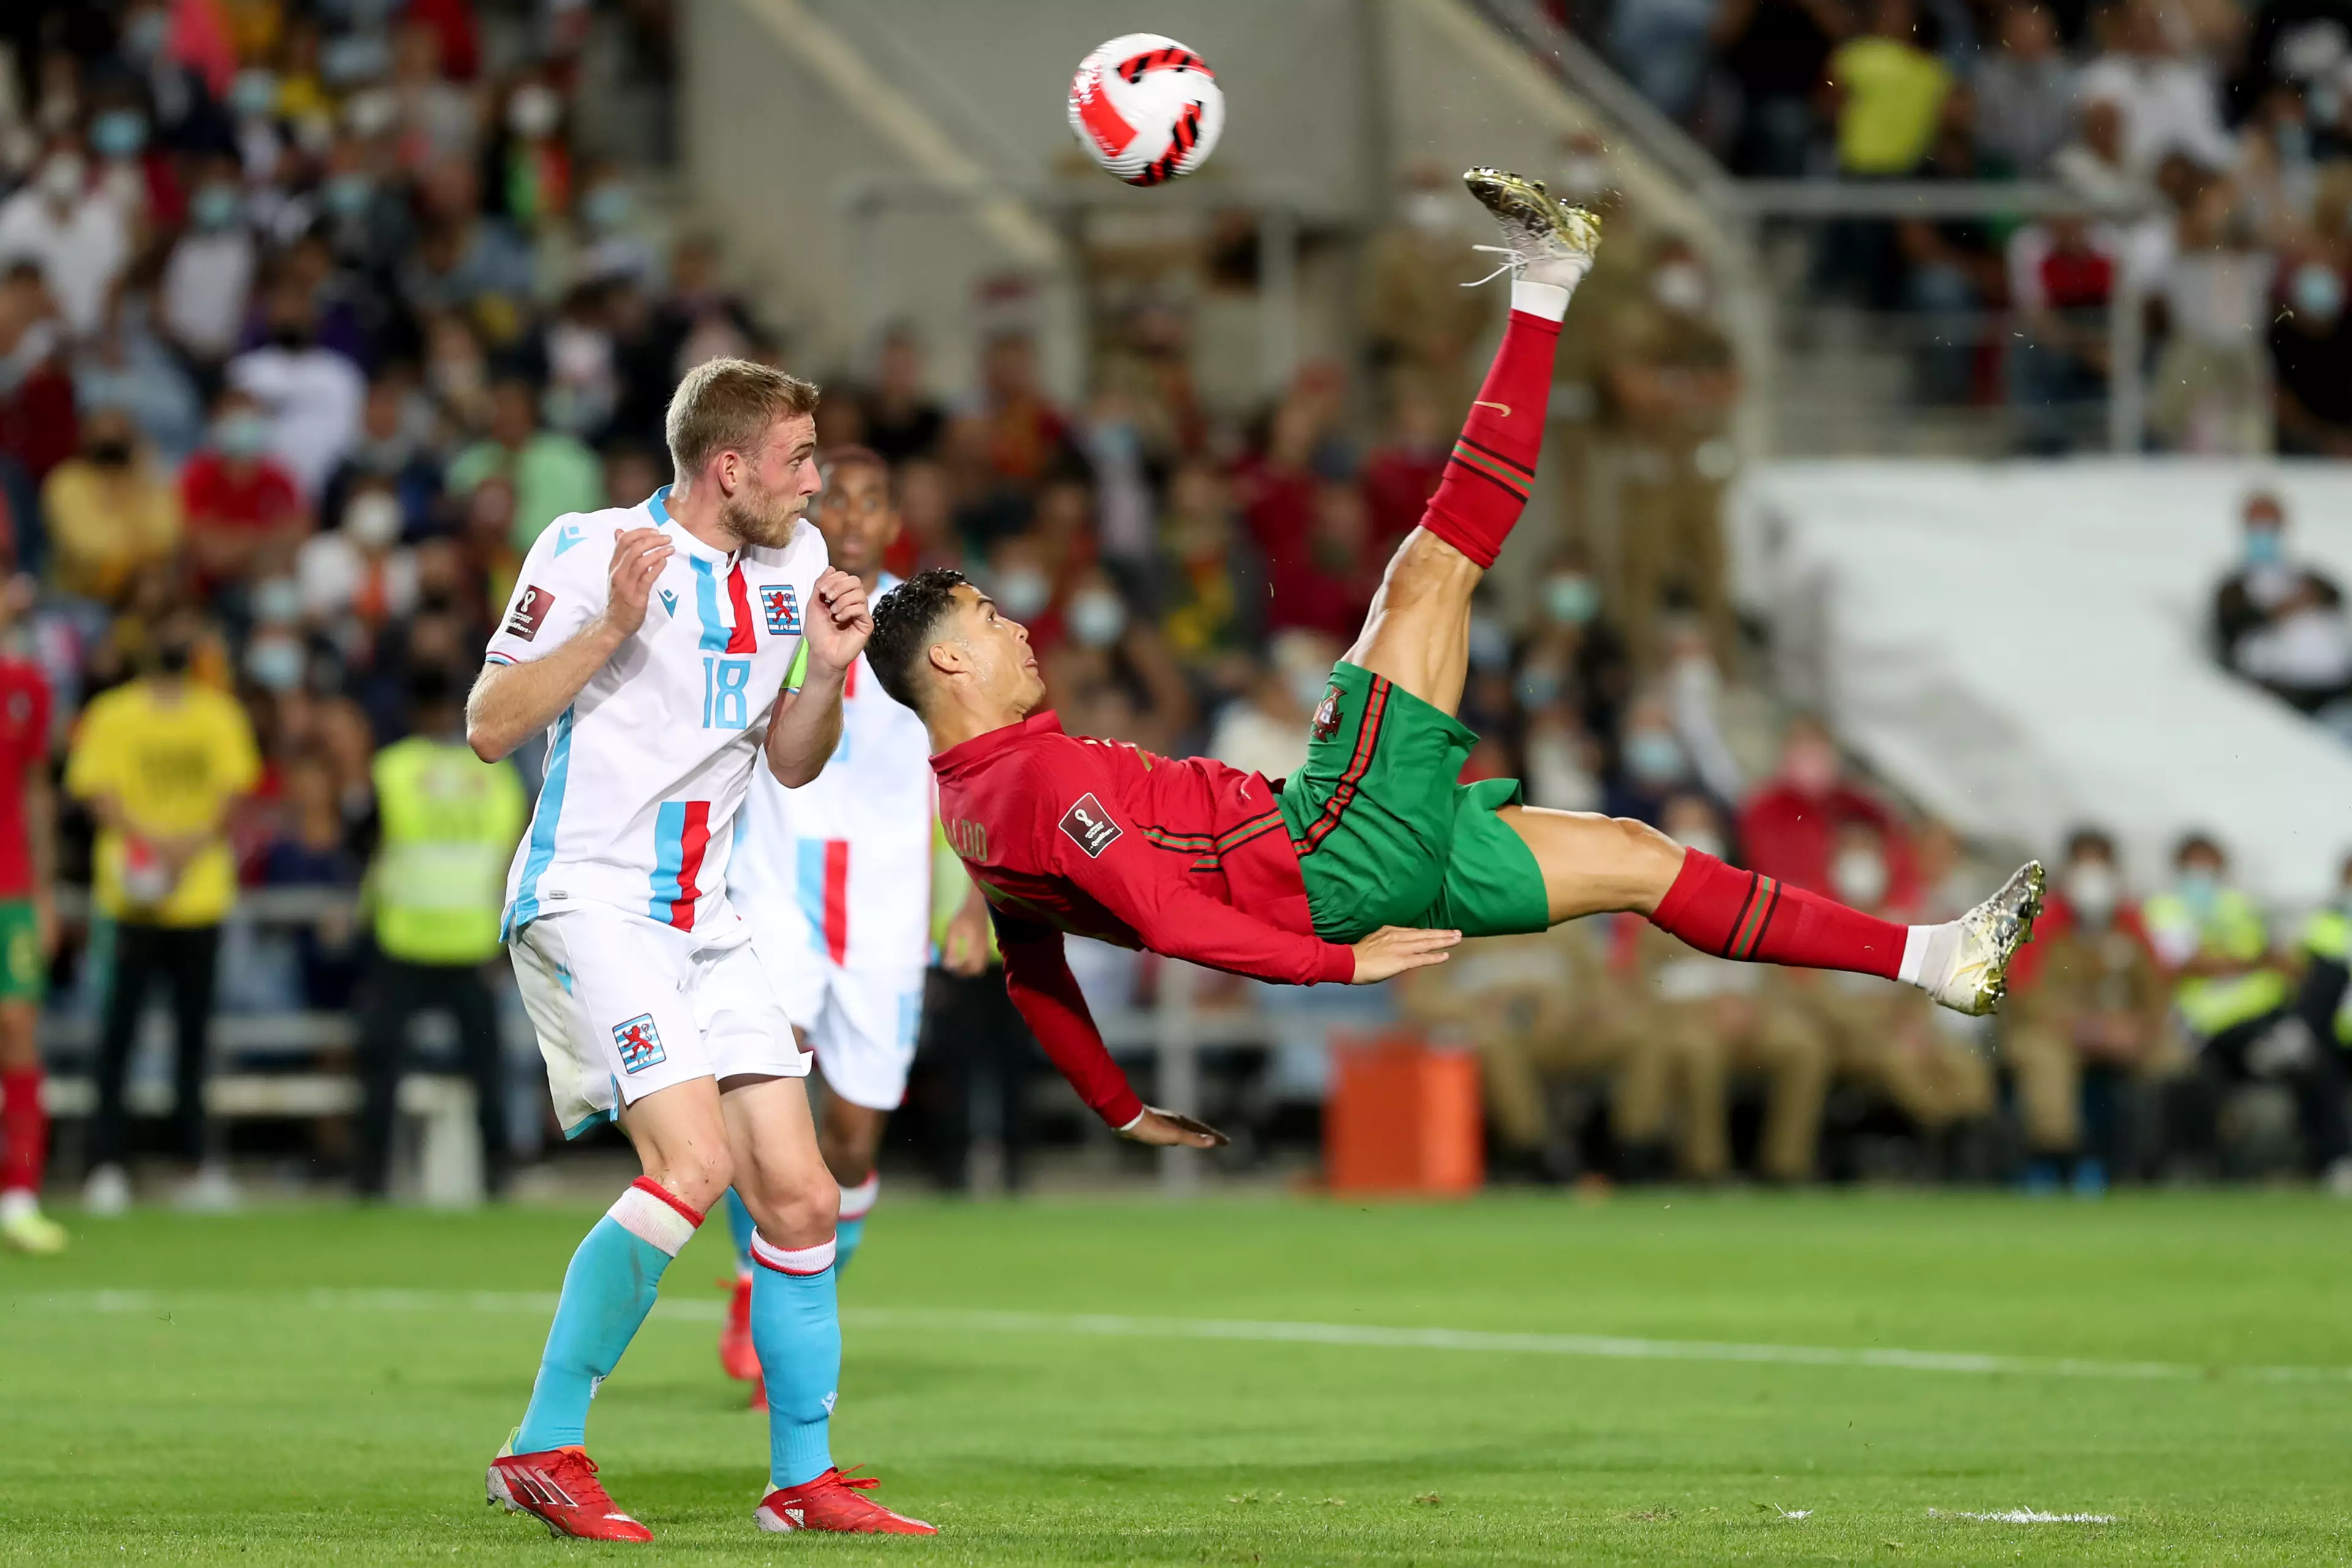 PA: Cristiano Ronaldo's bicycle kick against Luxembourg